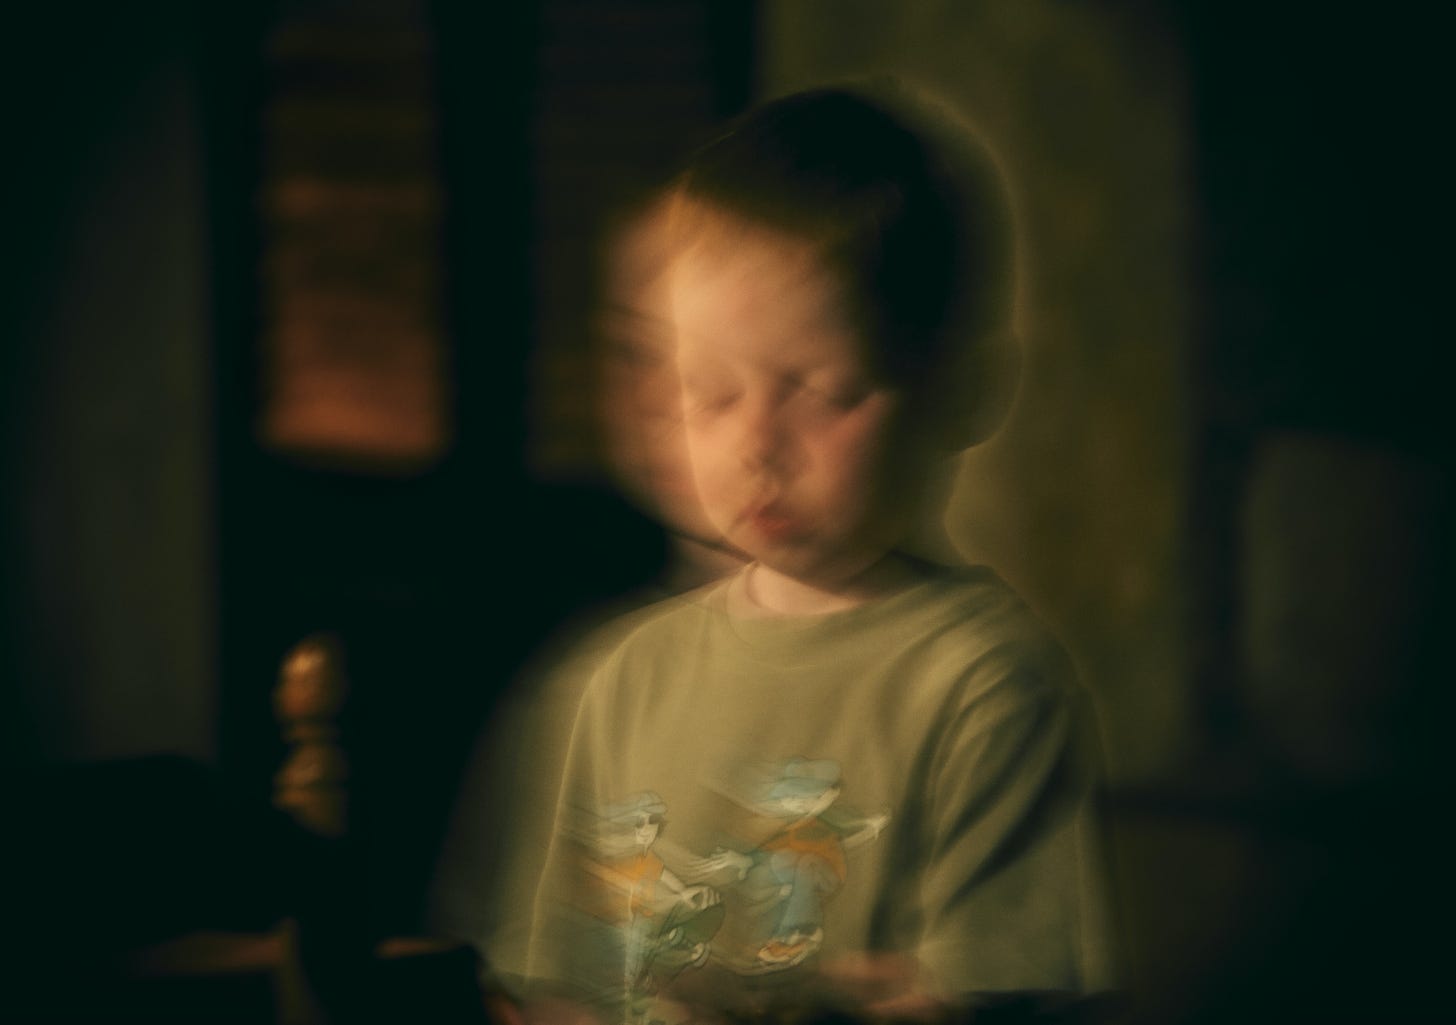 Blurry picture of a child.